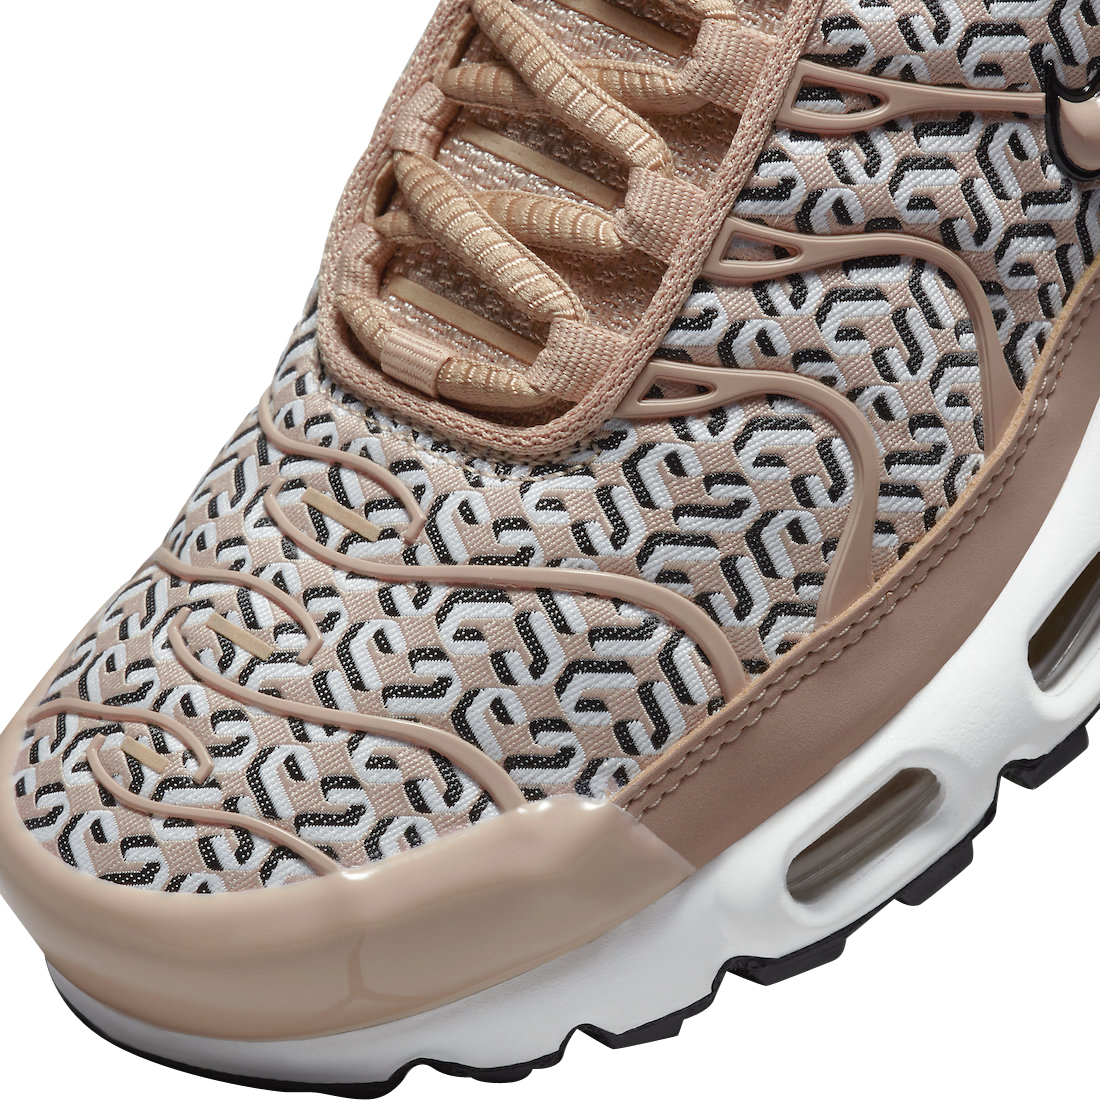 Nike WMNS Air Max Plus United in Victory FB2557-200